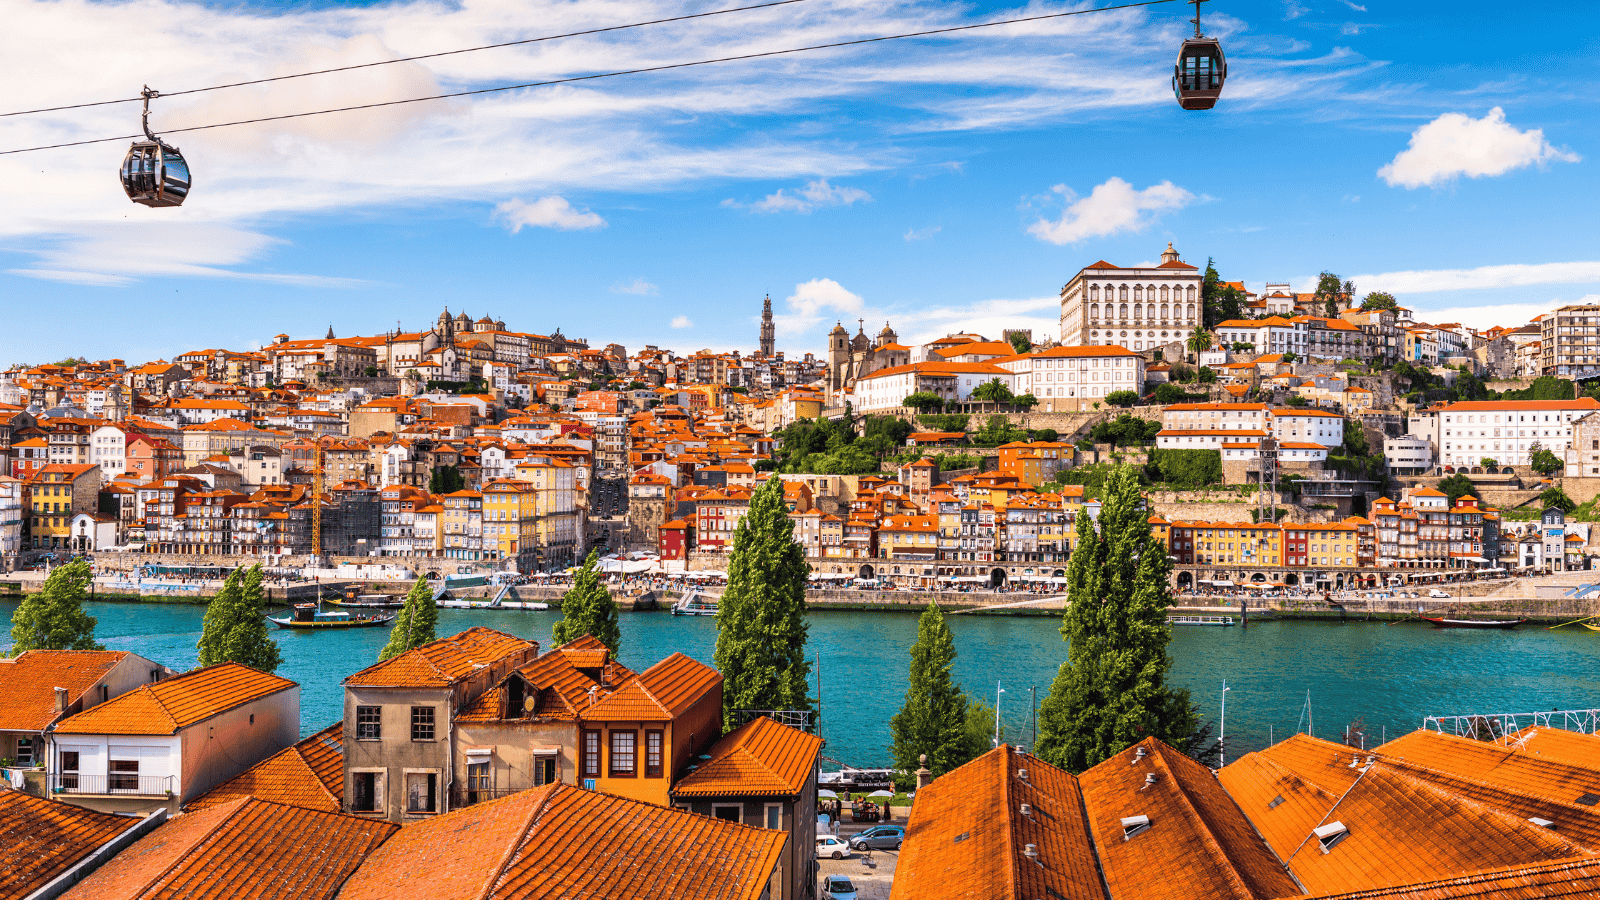 <p><a href="https://www.vikingrivercruises.com/cruise-destinations/europe/portugals-river-gold/2025-lisbon-porto/index.html" rel="nofollow external noopener noreferrer">Portugal’s River of Gold</a> is one of the most unique ways to sightsee this beautiful country. Operated by Viking, this cruise takes place on the Duoro River. The tour includes eight nights in Portugal and one in Spain, exposing tourists to numerous culturally significant landmarks. </p><p>Viking’s itinerary features several guided tours for guests to immerse themselves in Portuguese and Spanish cultures. You’ll see medieval fortresses, intricate architecture, and scenic valleys along the way. Food lovers will also enjoy sampling the <a href="https://whatthefab.com/food-of-portugal.html" rel="follow">local cuisine</a>, like port wine, cheese, and olive oil. </p>